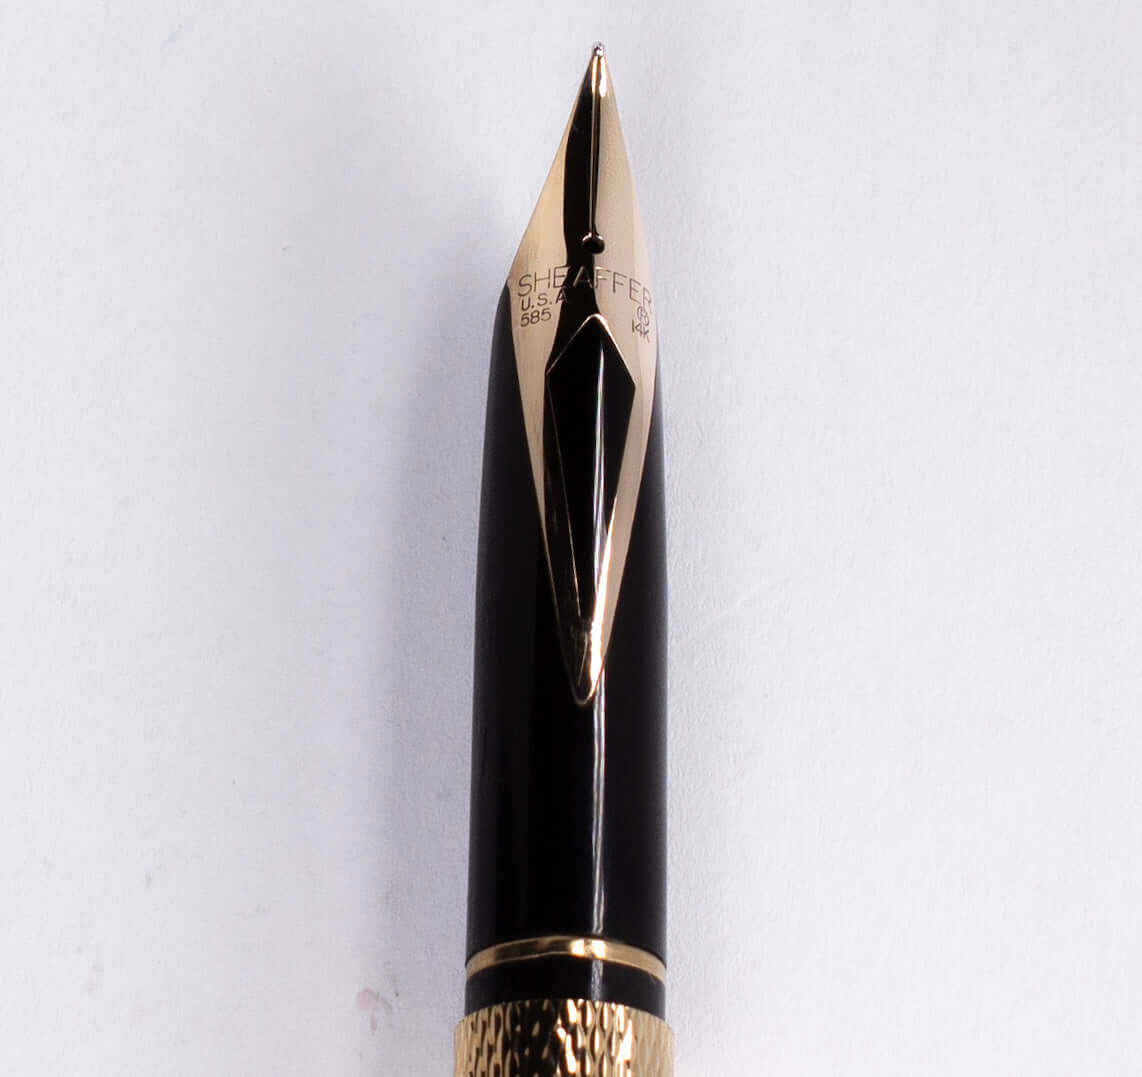 ${titleName/Type: Sheaffer Slim Targa Manufacture Year: 1980s Length: 5 3/8 Filling System: It takes Slim Sheaffer-style cartridges or converters. The original squeeze converter is included. Color/Pattern: 23K electroplate finish in a deep-cut Barley Corn